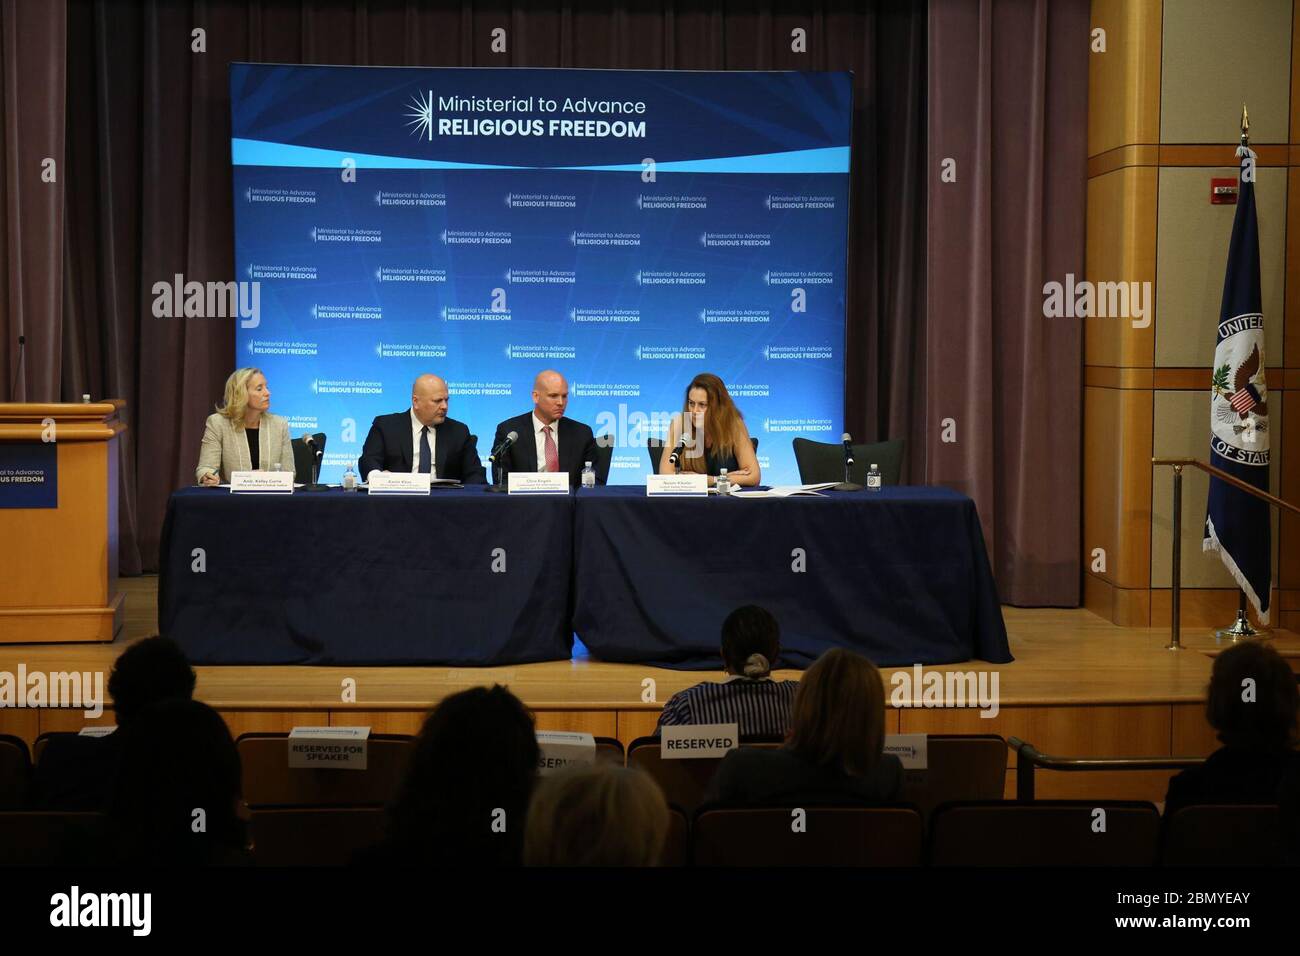 2019 Ministerial to Advance Religious Freedom Acting Director of the Simon-Skjodt Center for Prevention of Genocide Naomi Kikoler speaks on a panel at the Ministerial to Advance Religious Freedom at the U.S. Department of State in Washington D.C. on July 17, 2019. Stock Photo